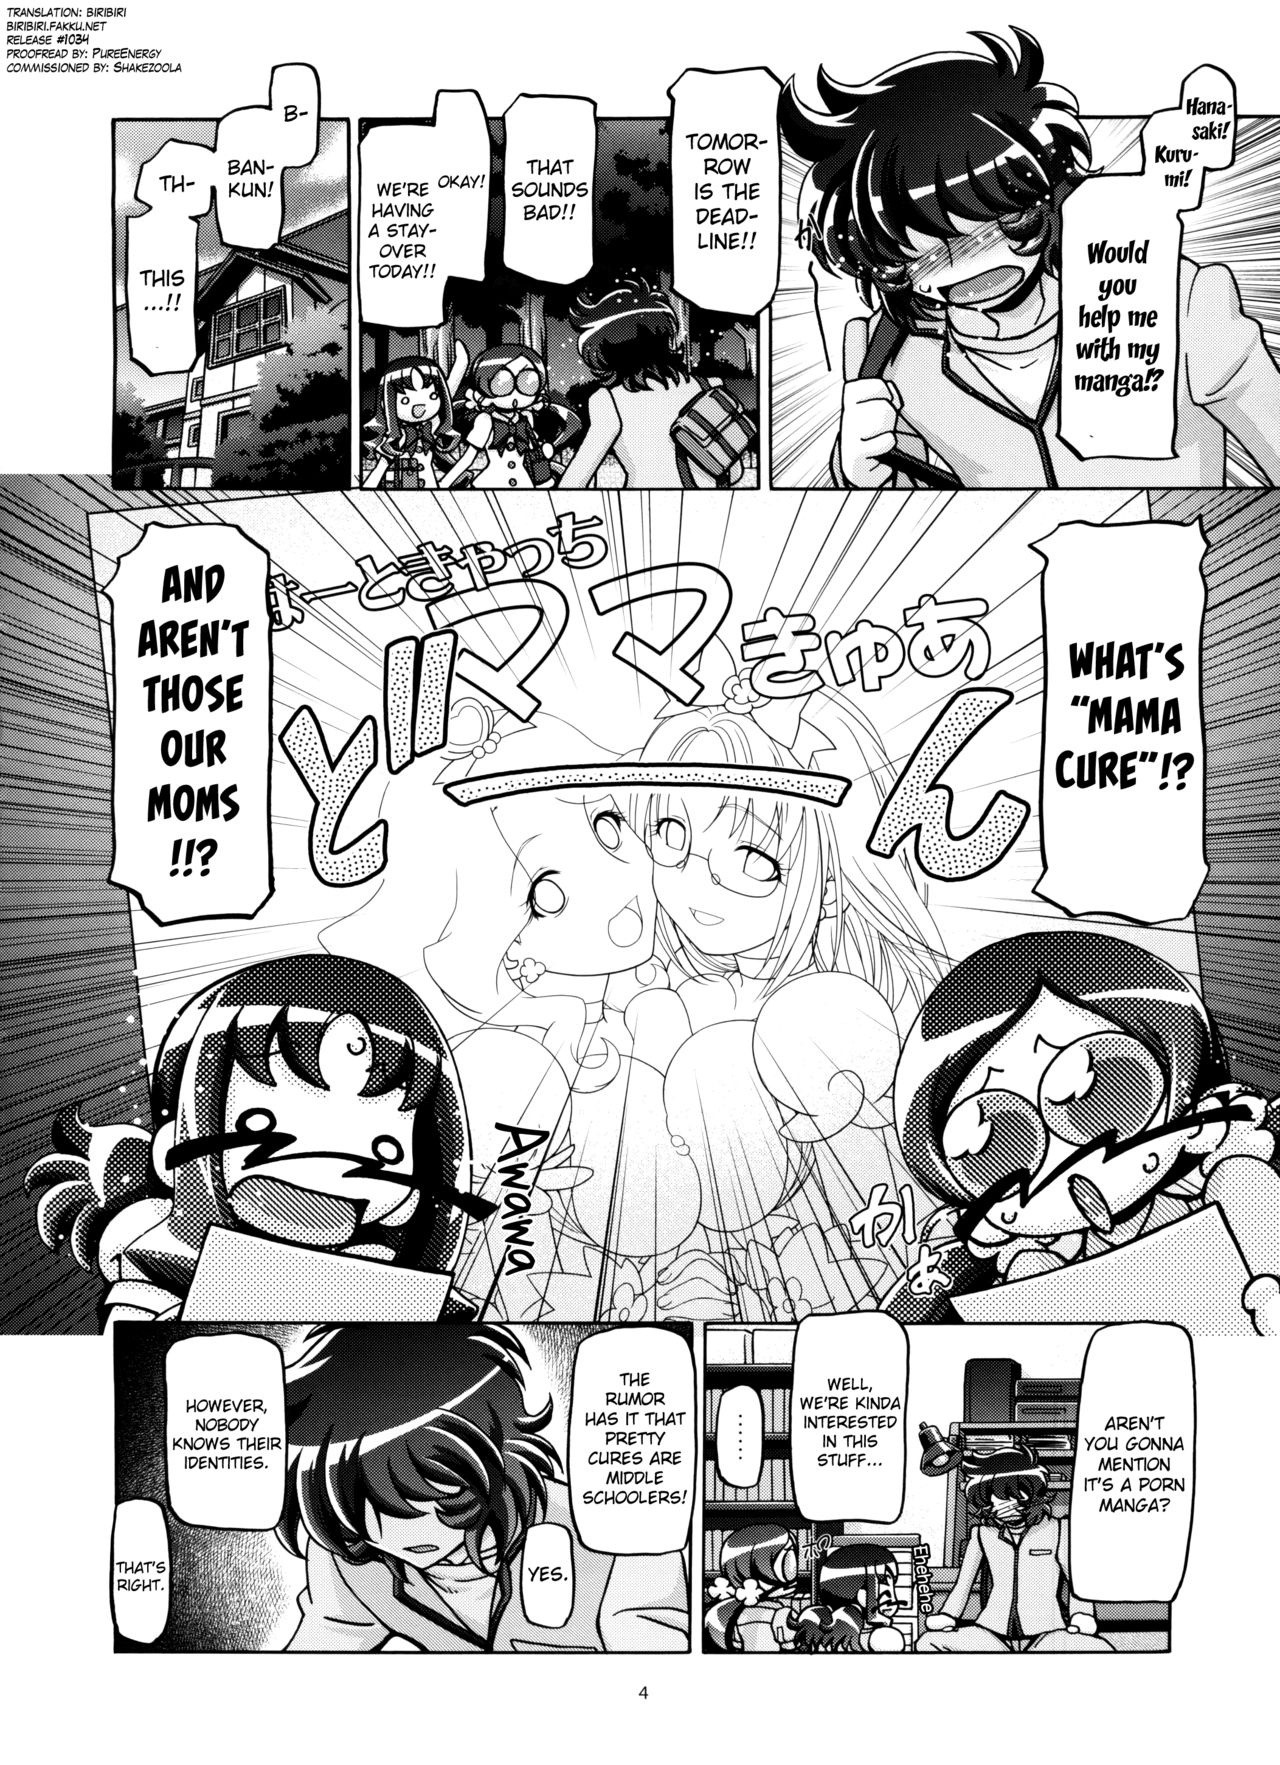 Heartcatch Mamacure hentai manga picture 4